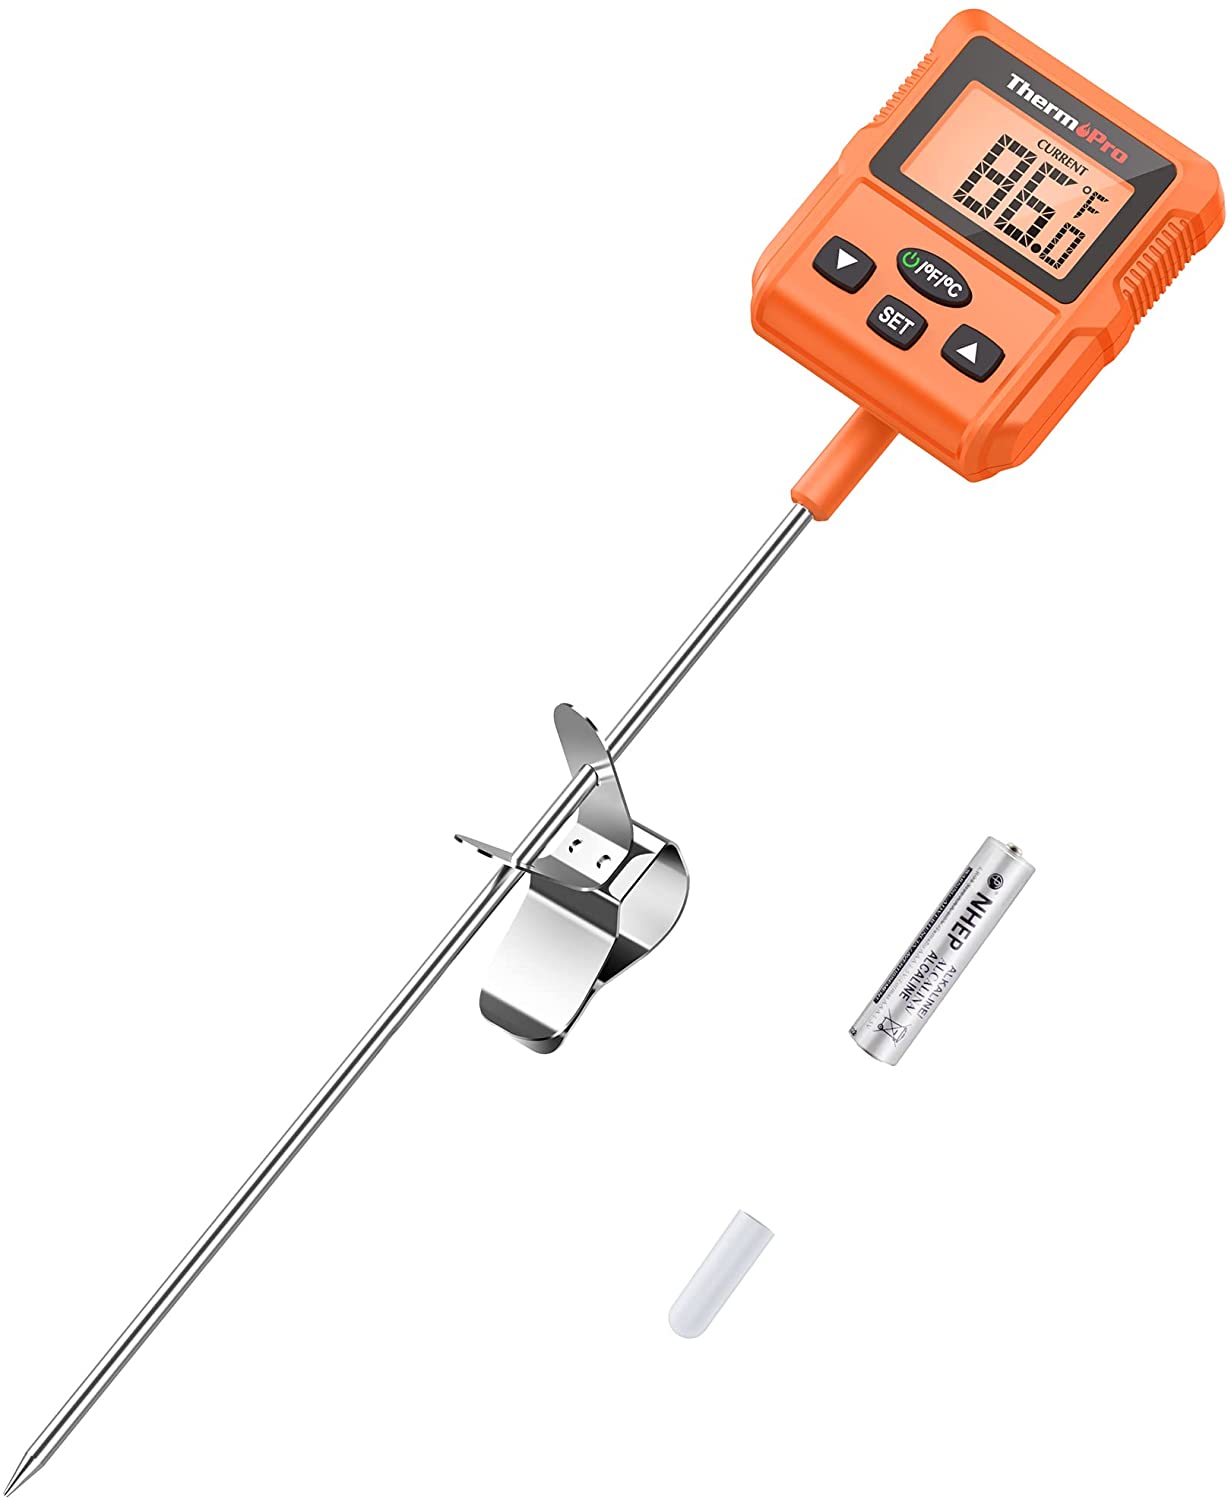 ThermoPro TP511 Digital Candy Thermometer